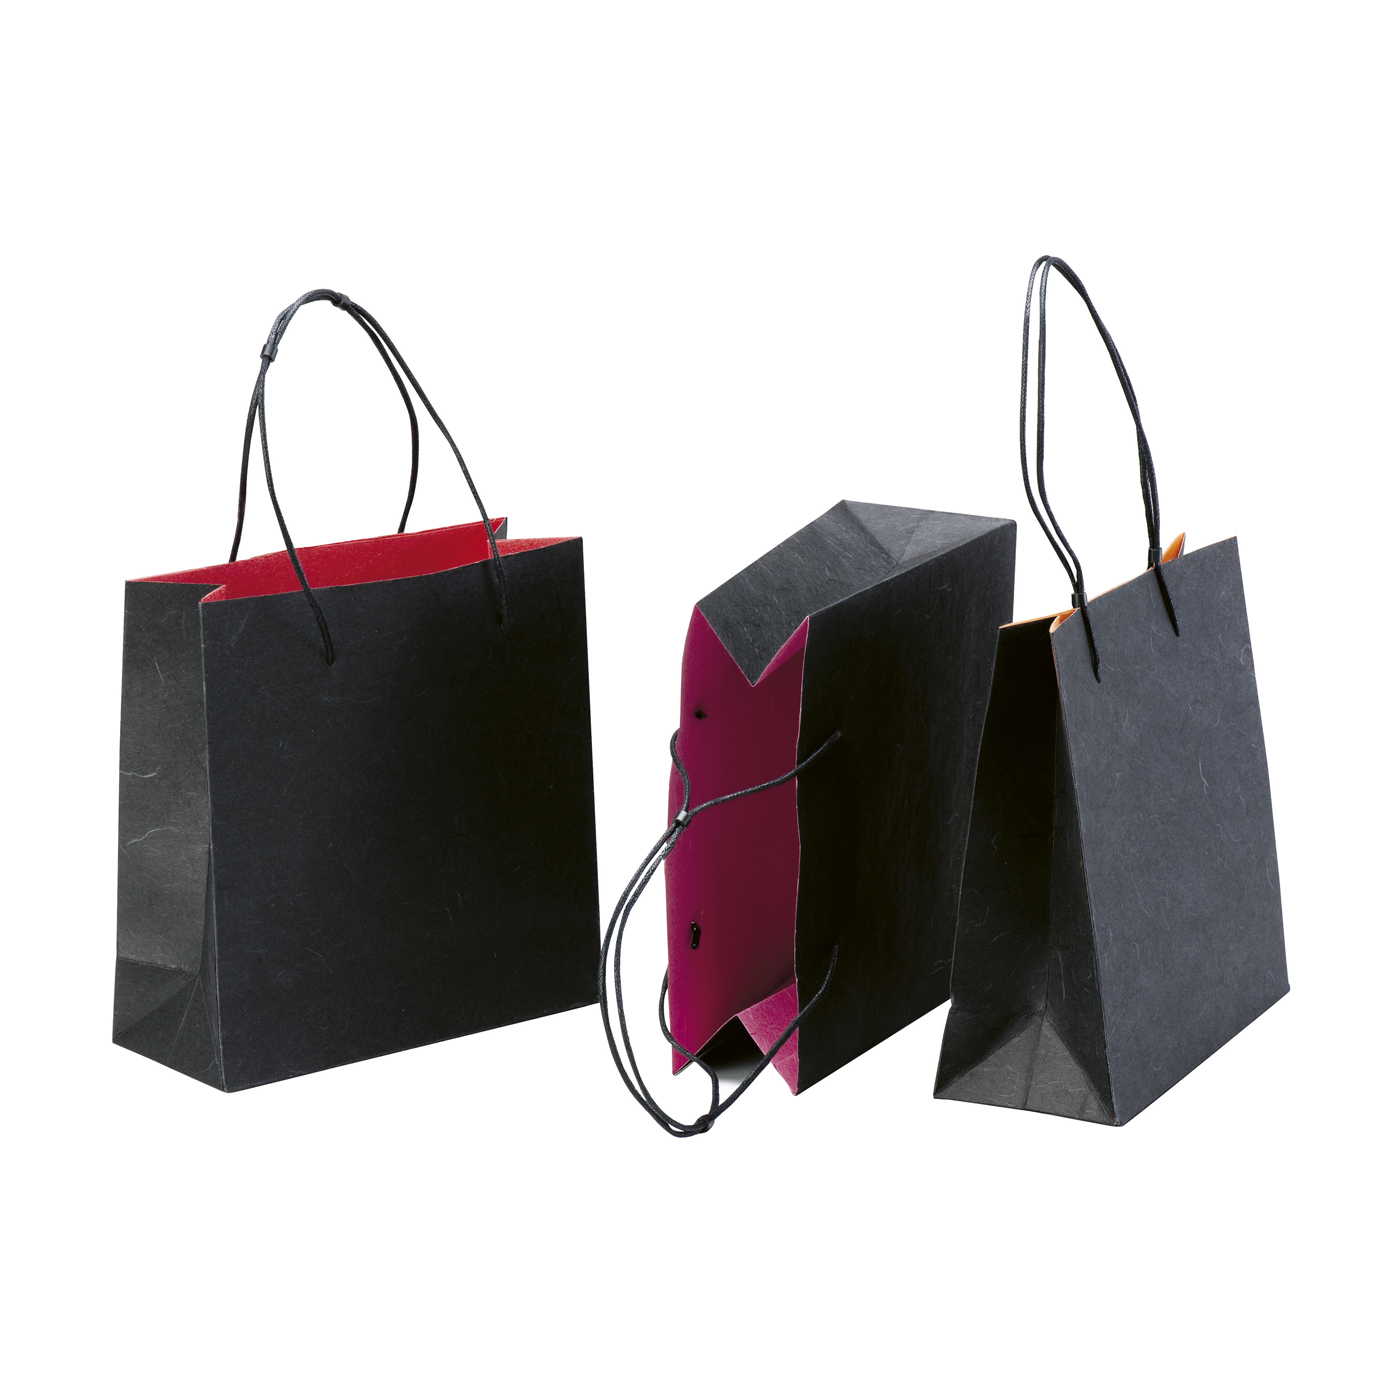 Carrying Bags "Duo", Red/Orange/Pink, 200 x 80 x 200 mm - 3 pieces